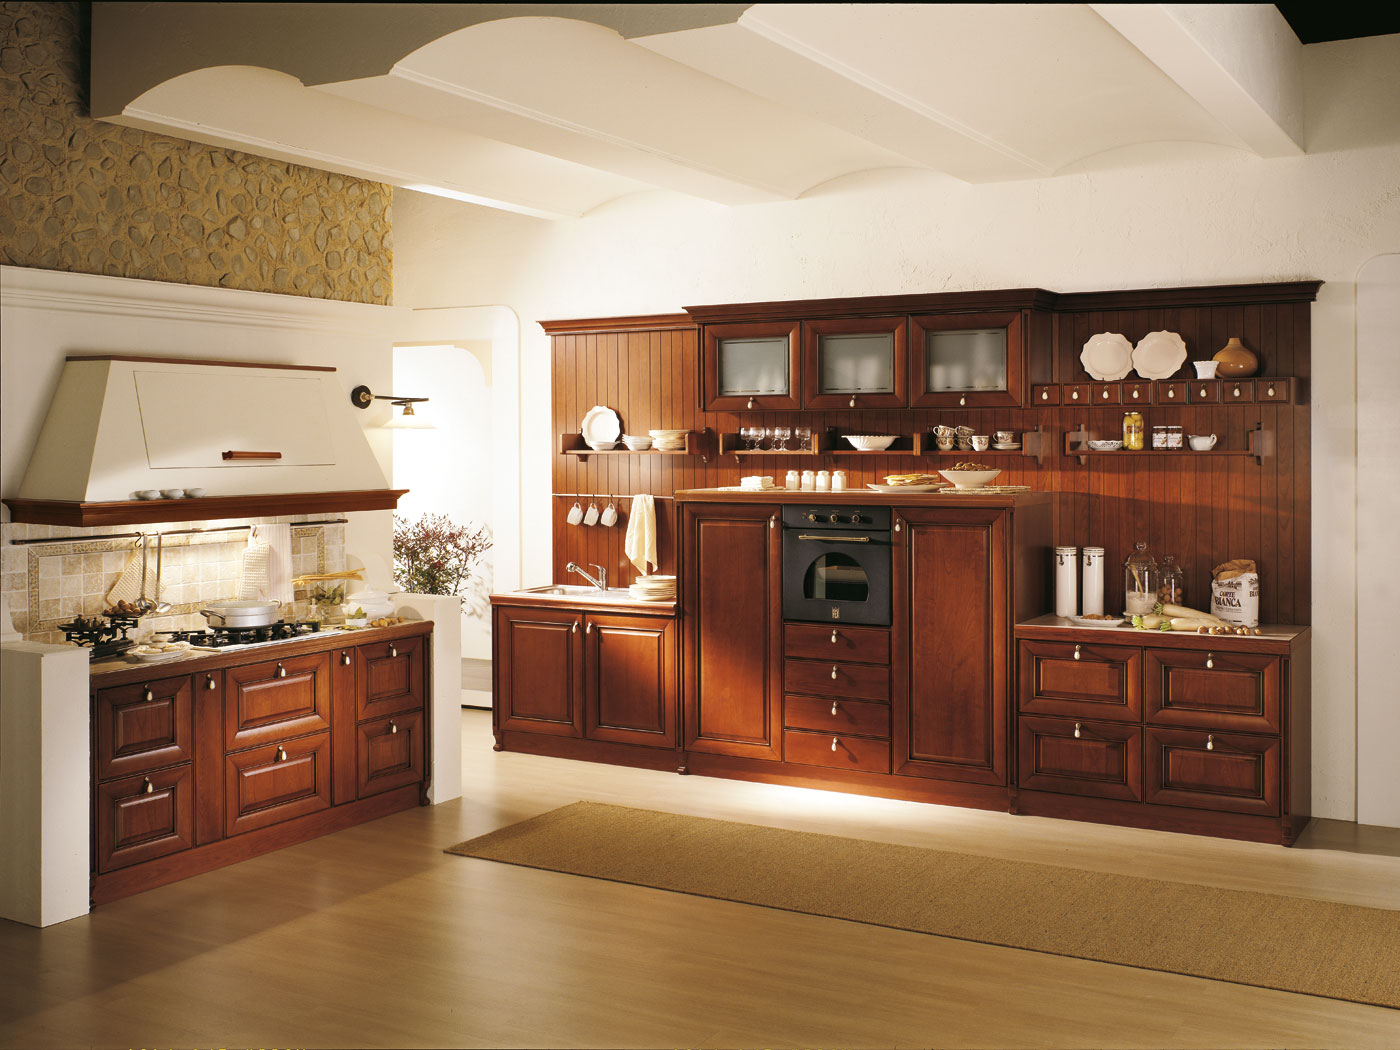 Solid Wood Raised Miter RTA Kitchen Cabinet SWK-001 | Houlive solid ...